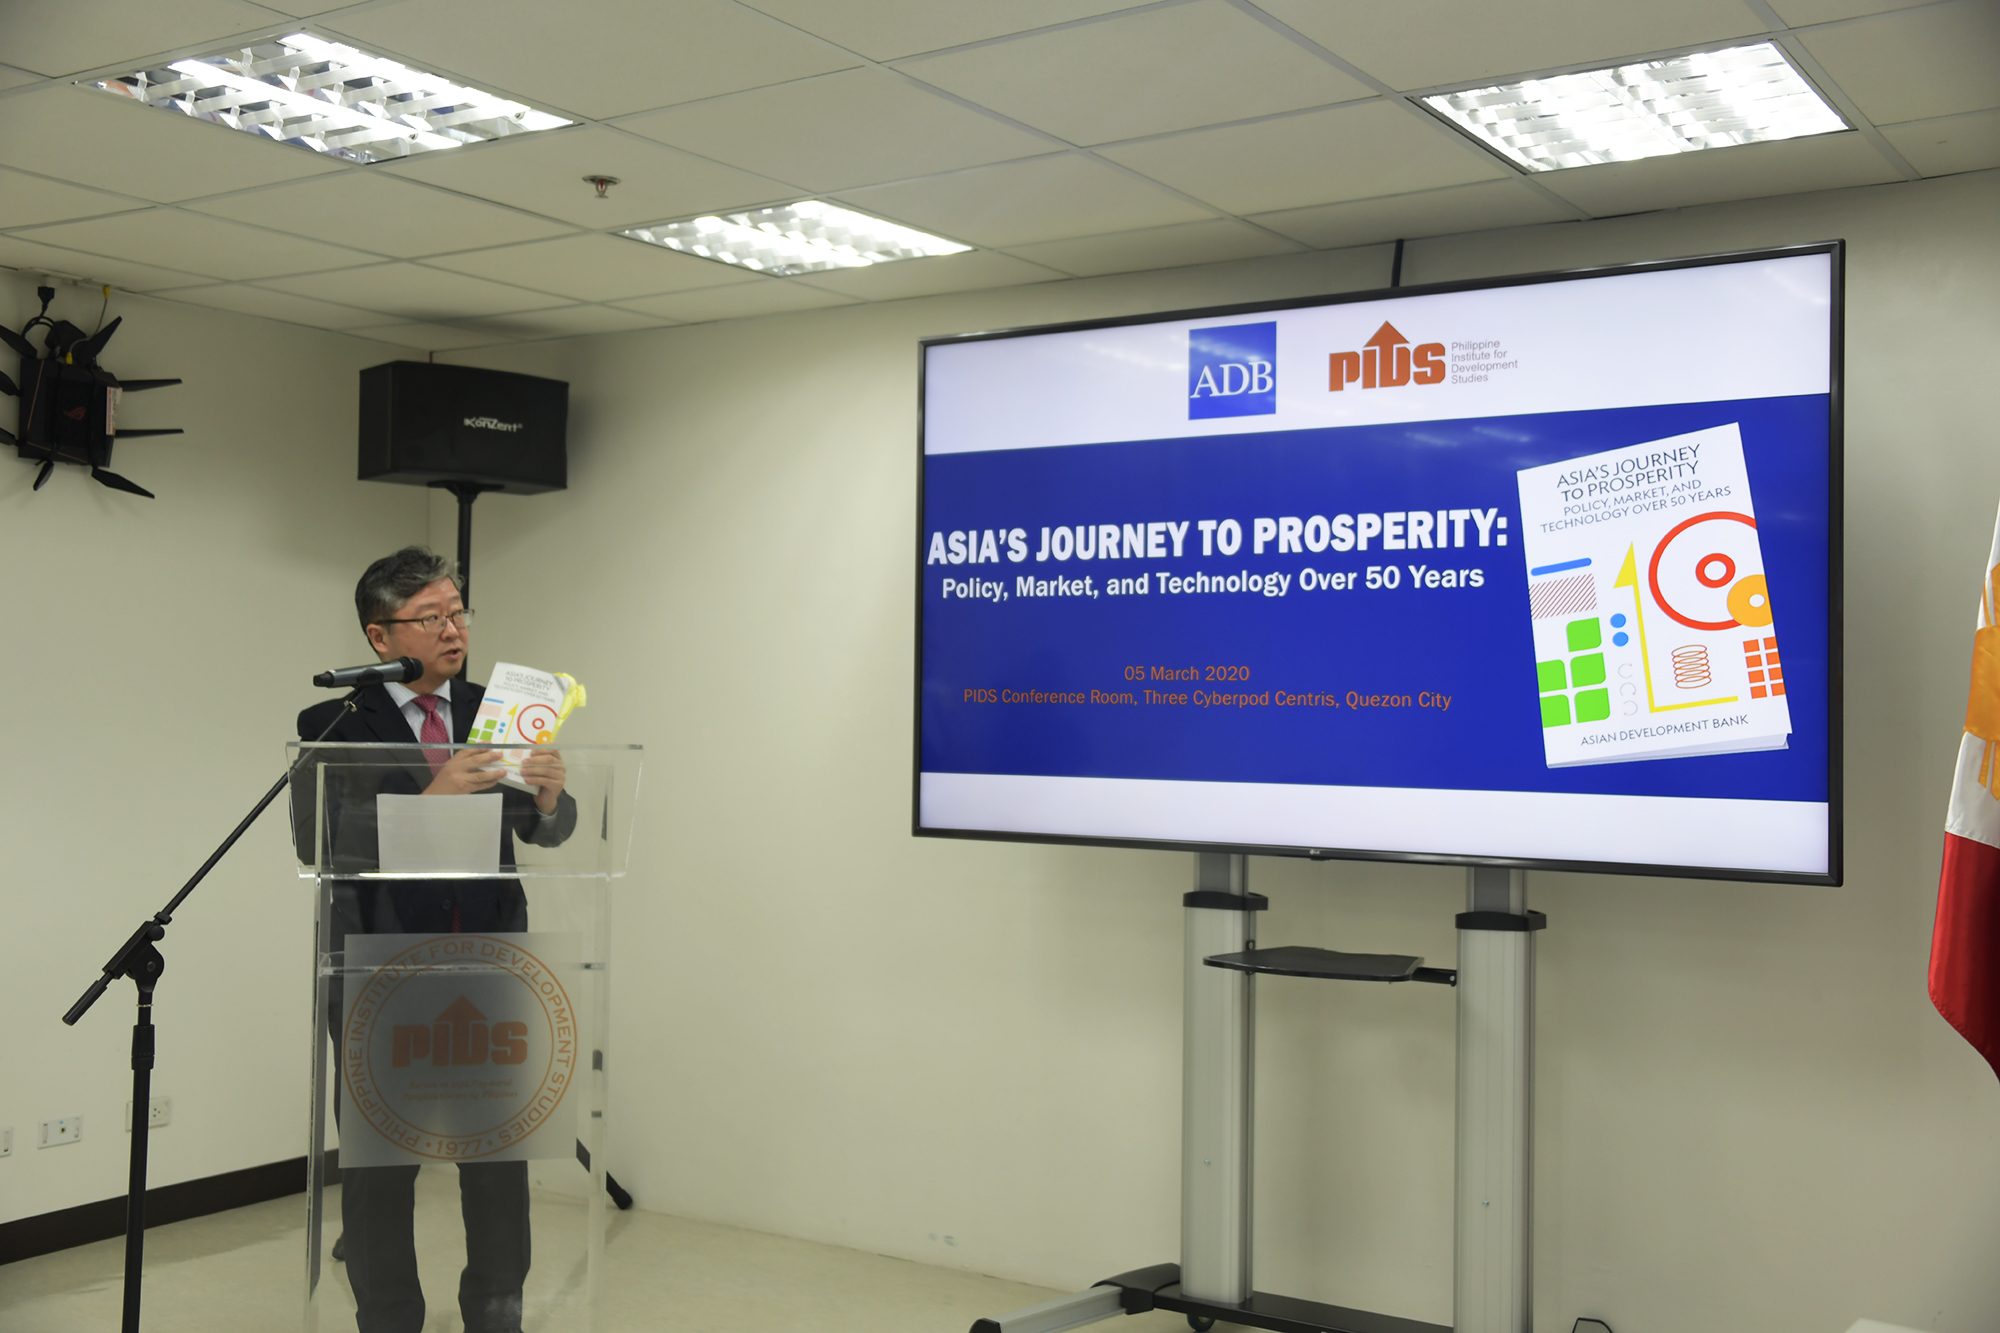 Dissemination Seminar on Asia's Journey to Prosperity: Policy, Market, and Technology over 50 Years-pids-adb-3-20200310.jpg